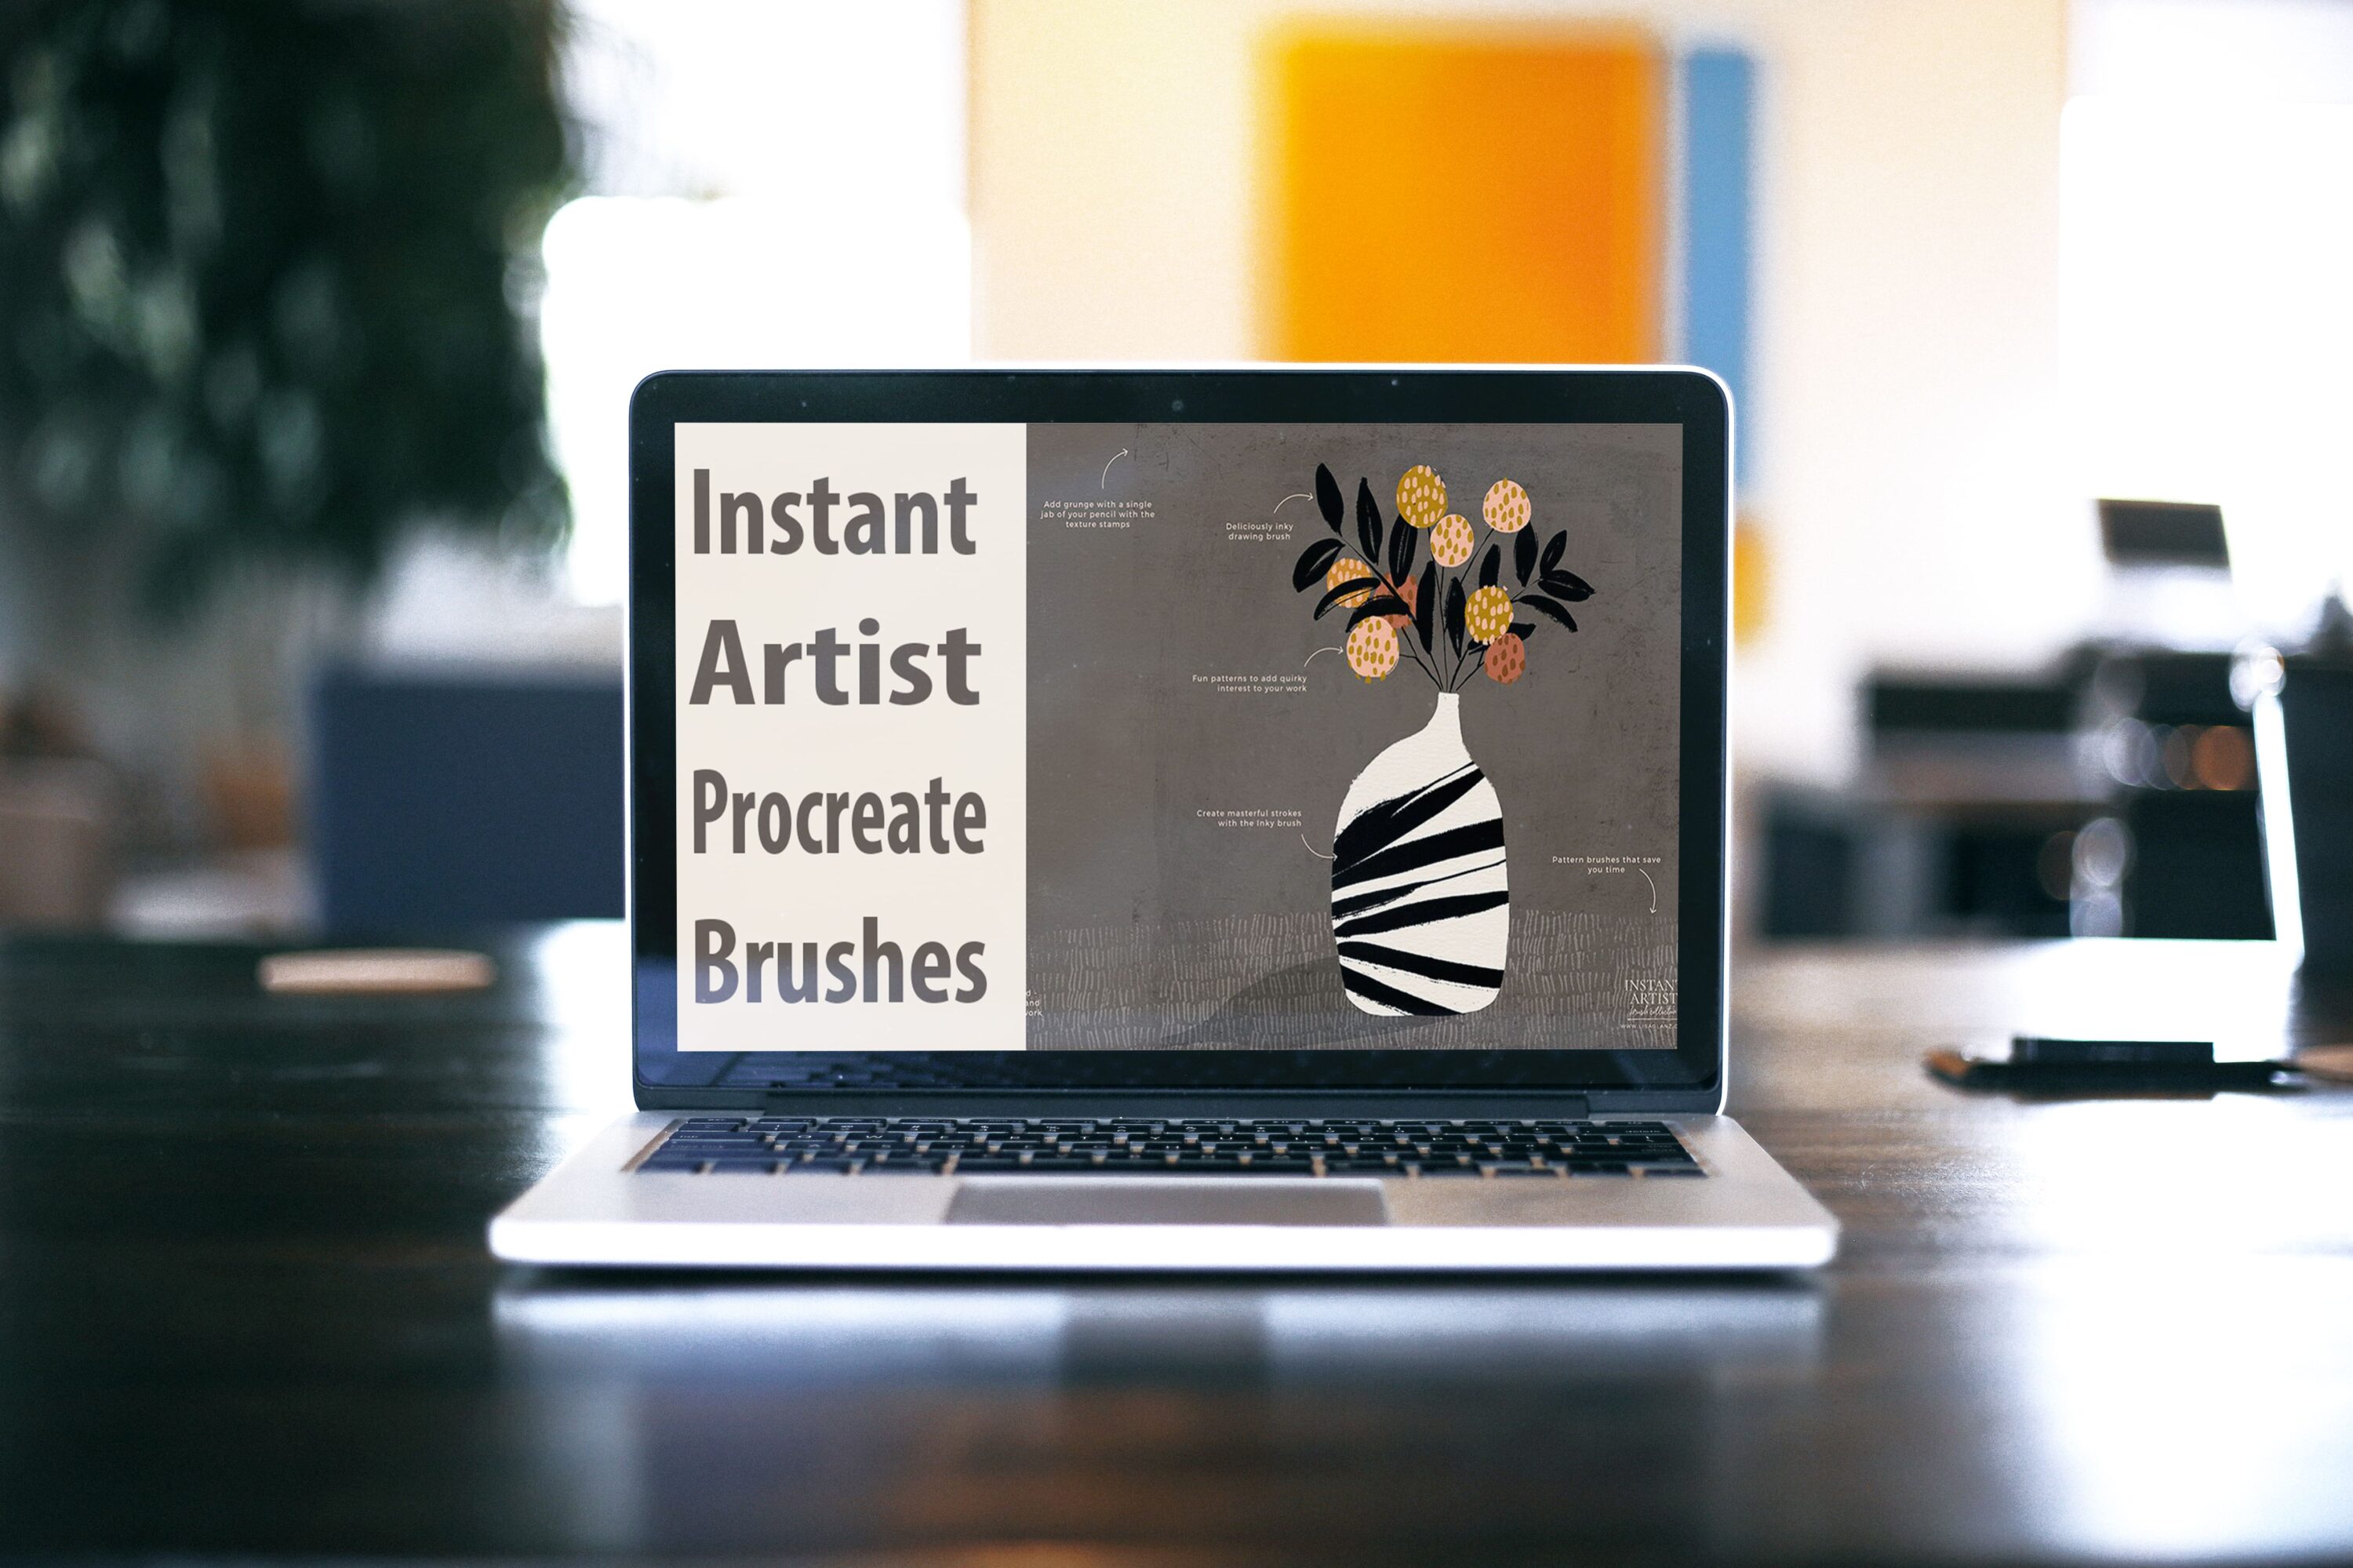 Laptop option of the Instant Artist Procreate Brushes.